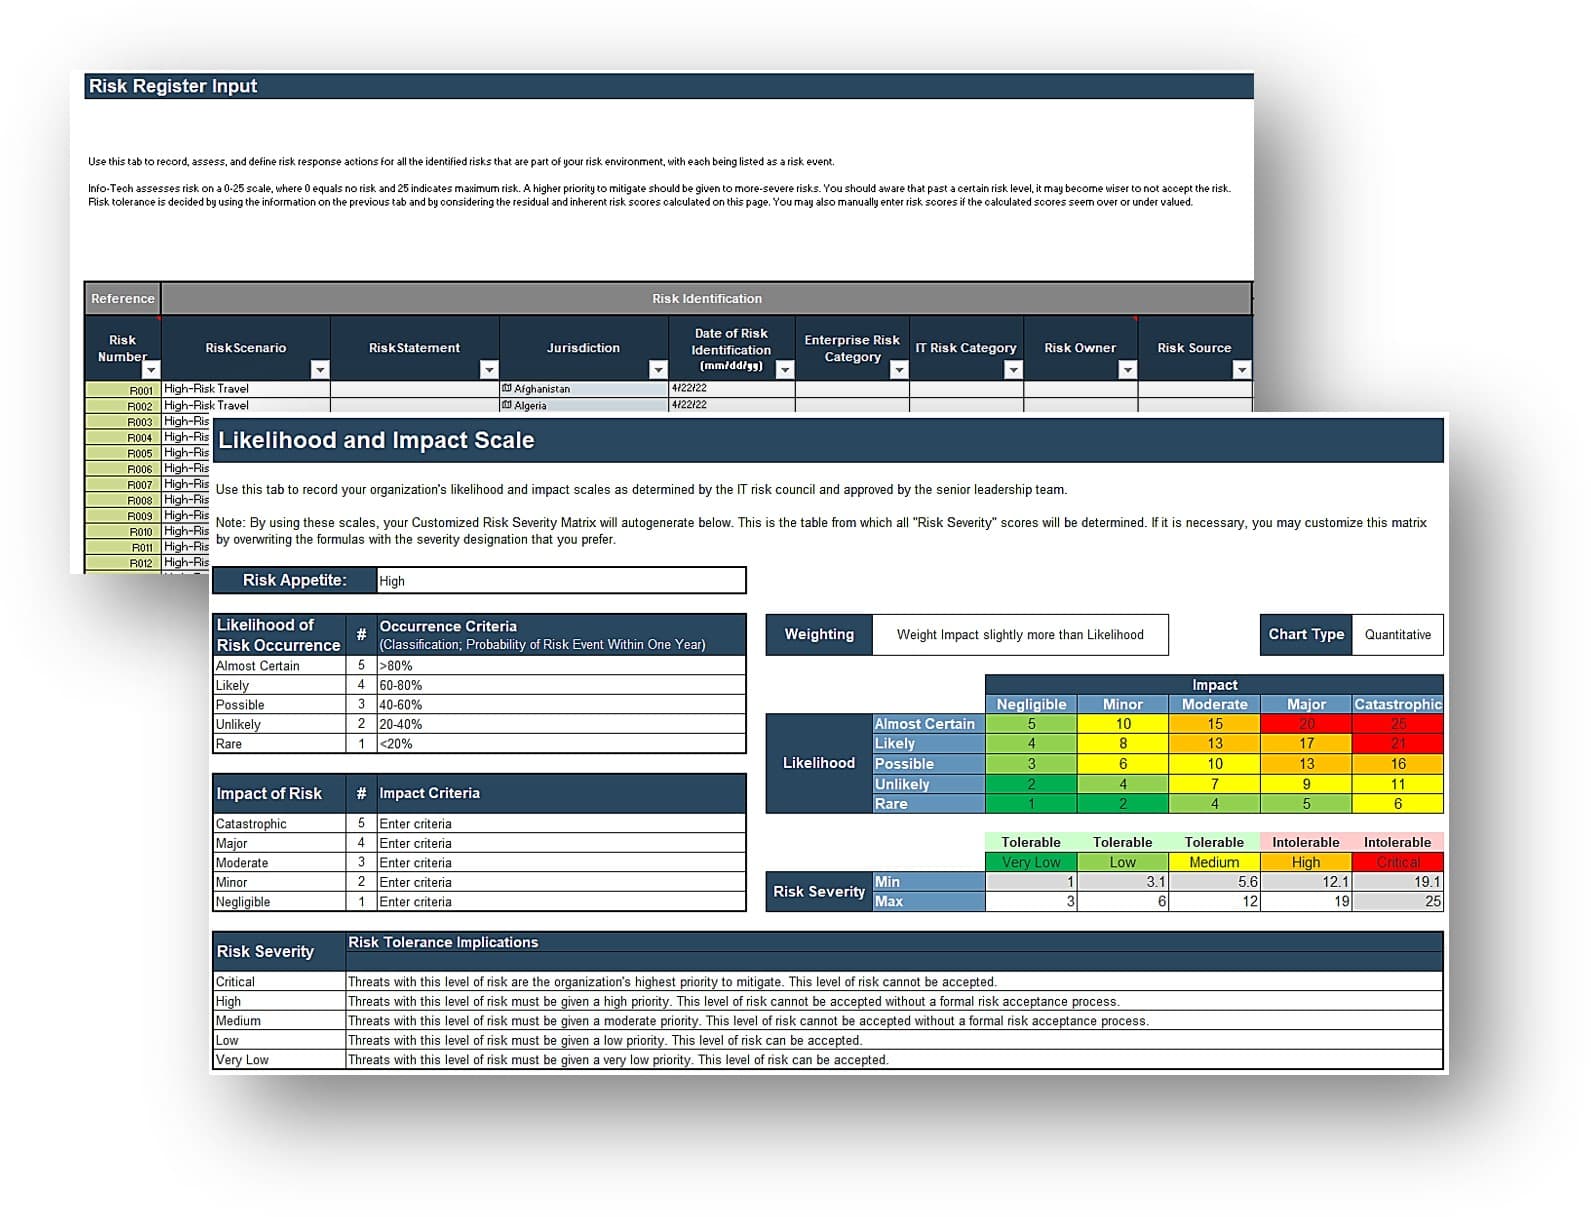 The image contains two screenshots of the Jurisdictional Risk Register and Heatmap Tool.